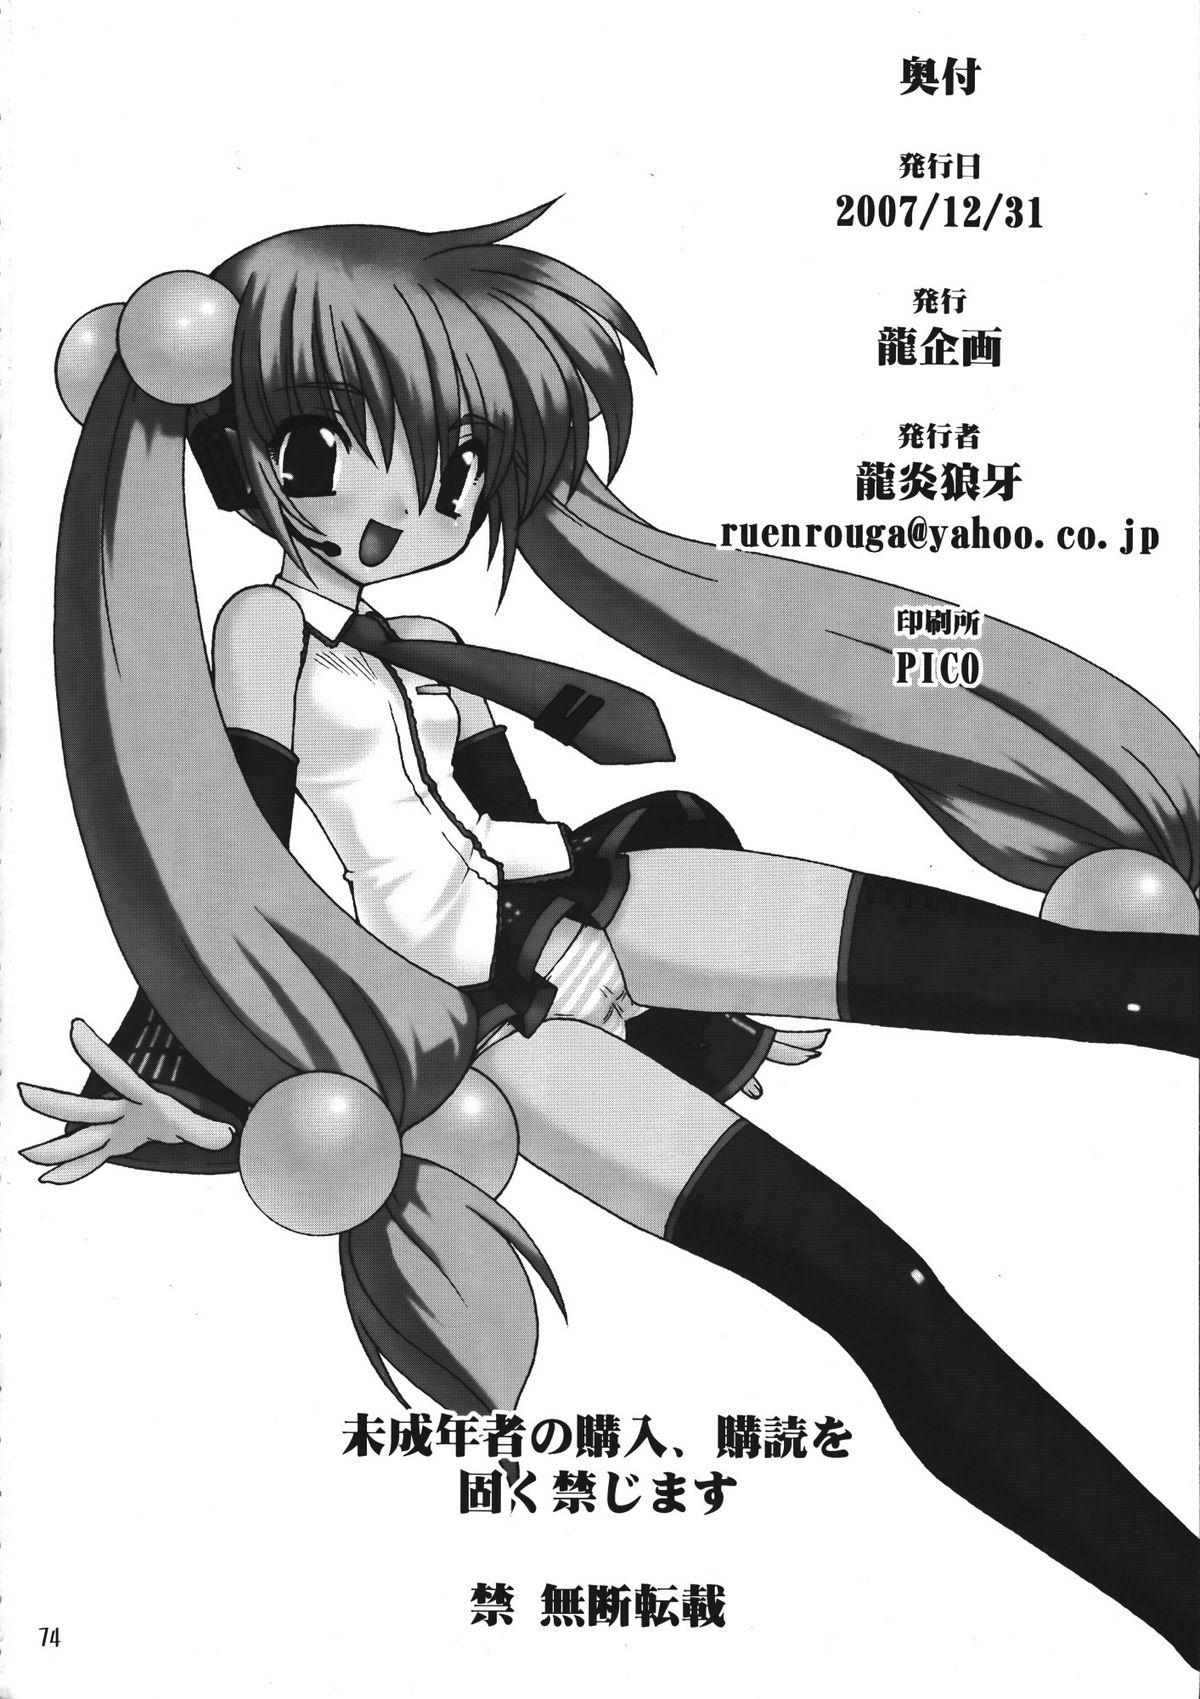 Perfect Body Mixture2 - Vocaloid Lucky star Kodomo no jikan Pure 18 - Page 74